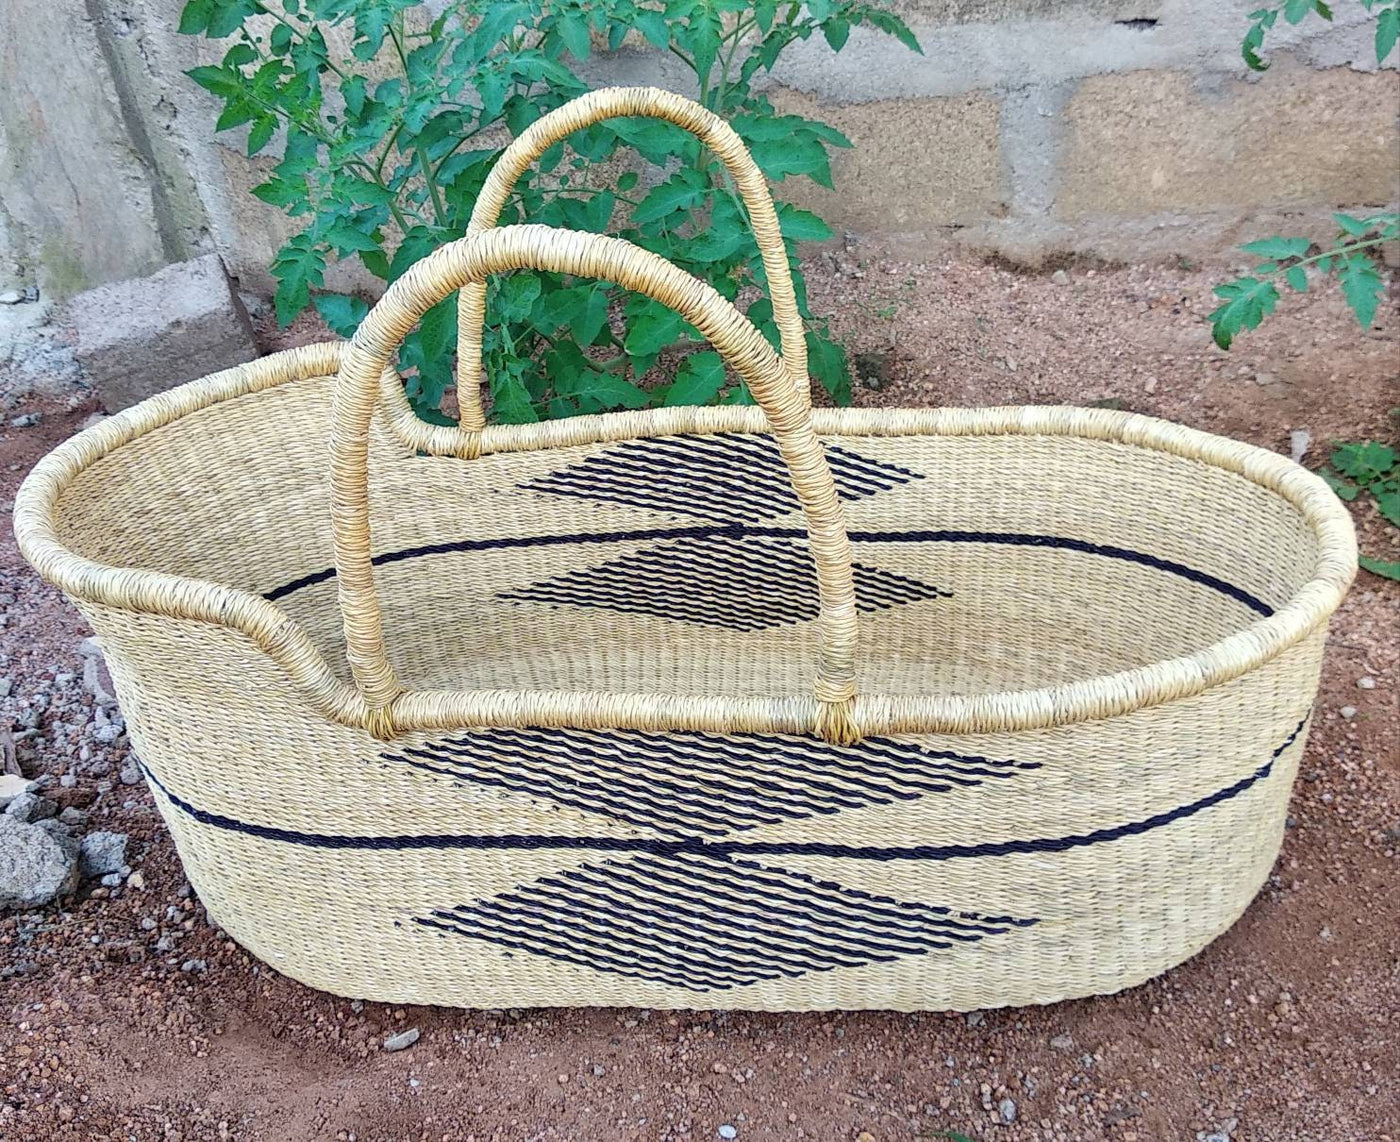 Baby bed | Moses basket | Baby bassinet | Lit de bébé | Babybett | Baby Moses basket | Moses basket bedding | Baby lounger | Toddler bed - AfricanheritageGH